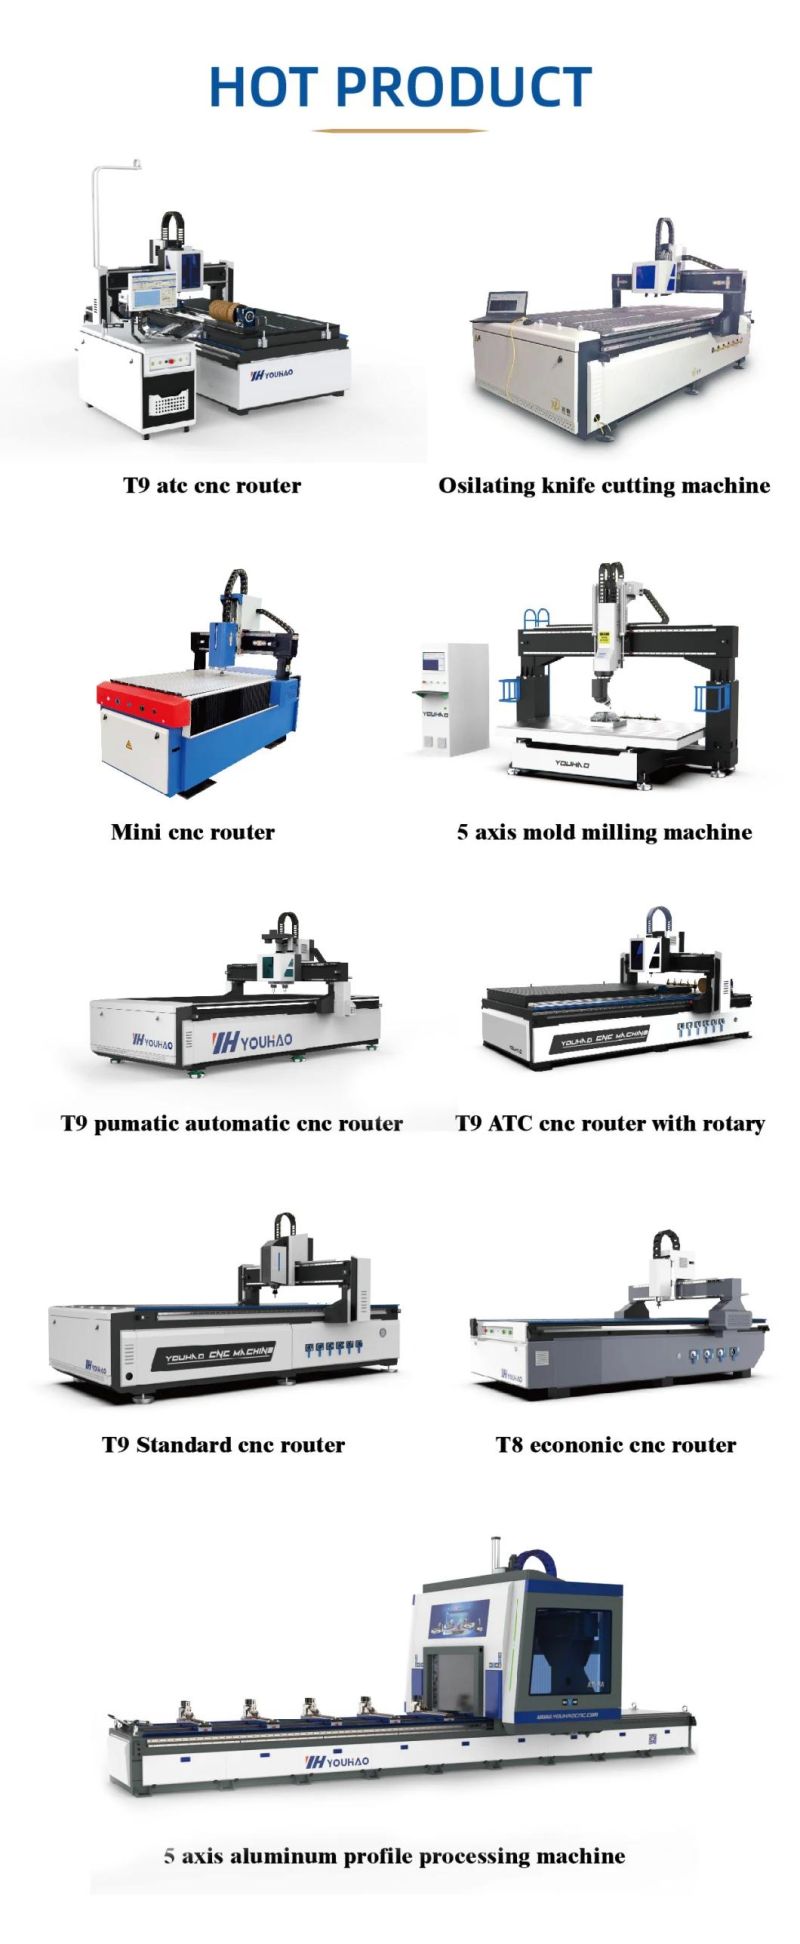 Furniture CNC Nesting CNC Router Computerized Wood Carving Machine Can Be Castomized